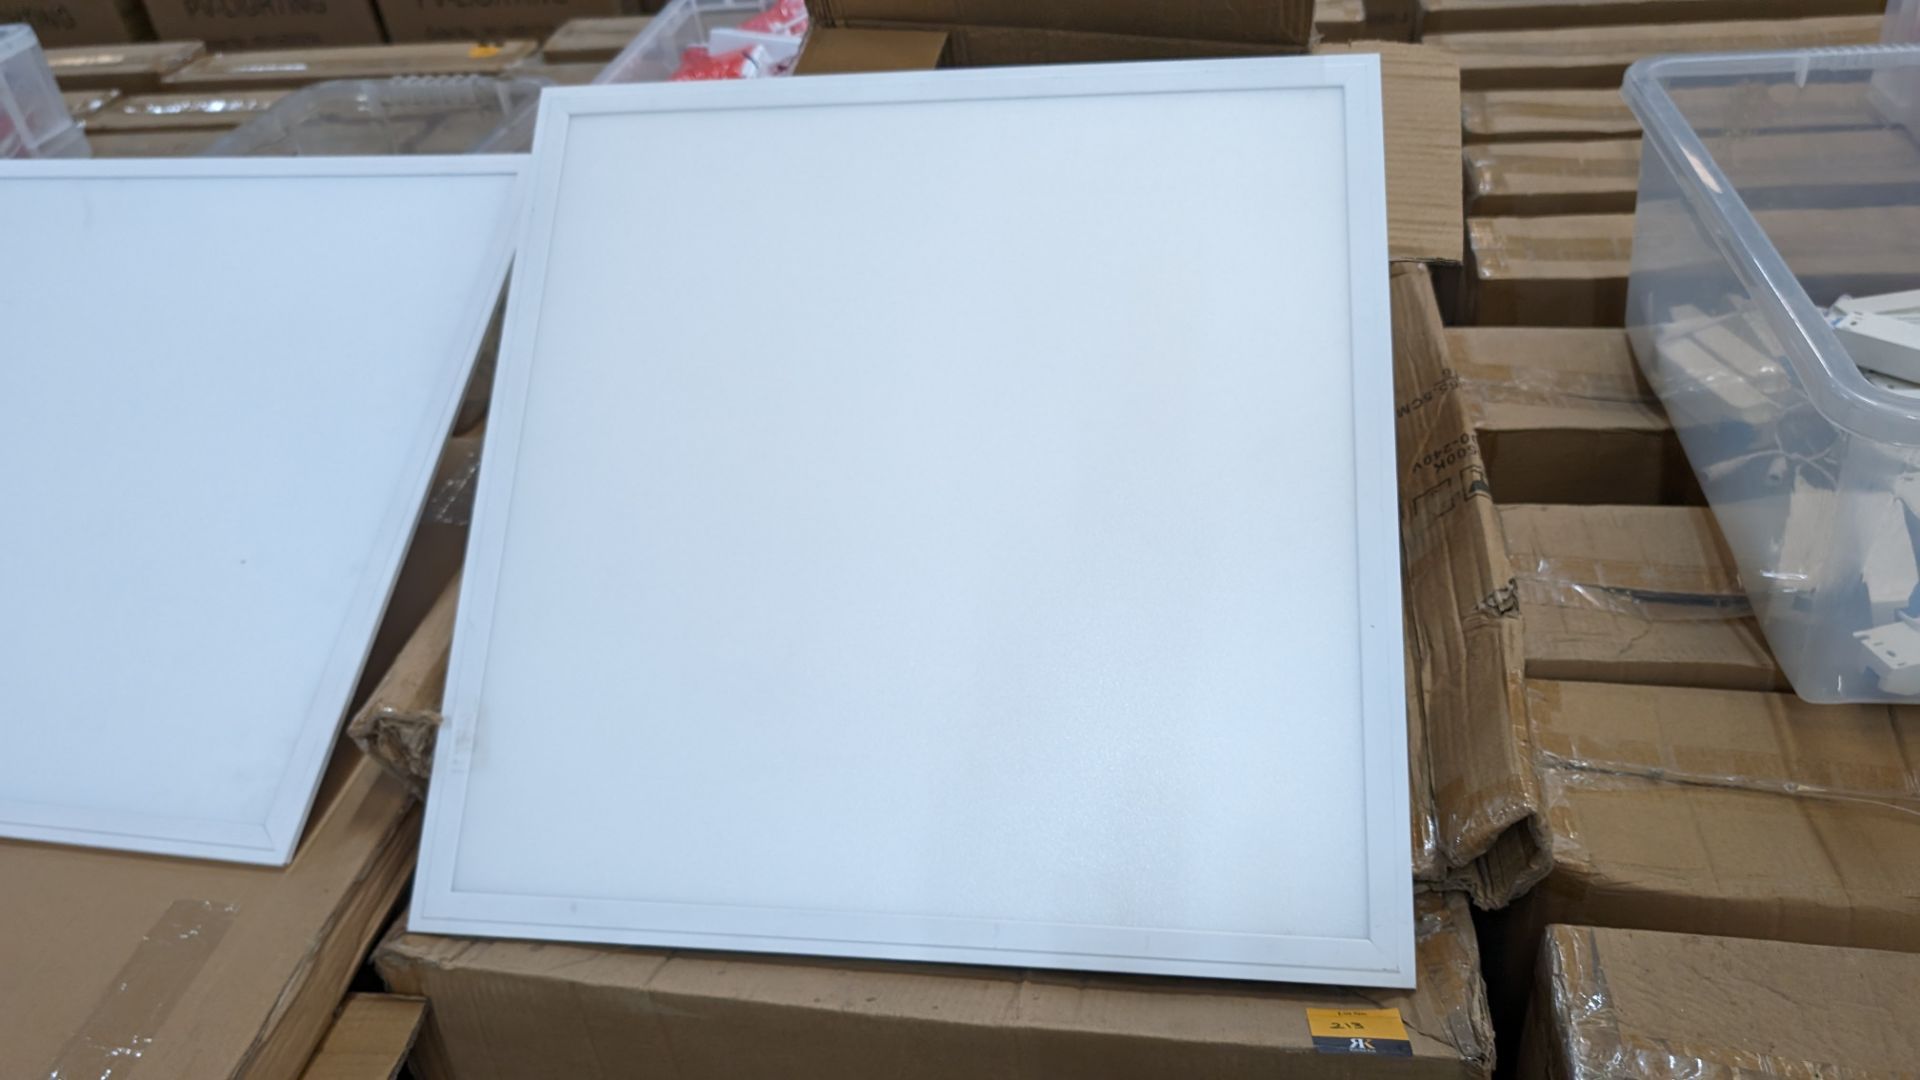 18 off 600mm x 600mm 36w 4500k 4320 lumens LED lighting panels. 36w drivers. This lot comprises 4 - Image 5 of 16